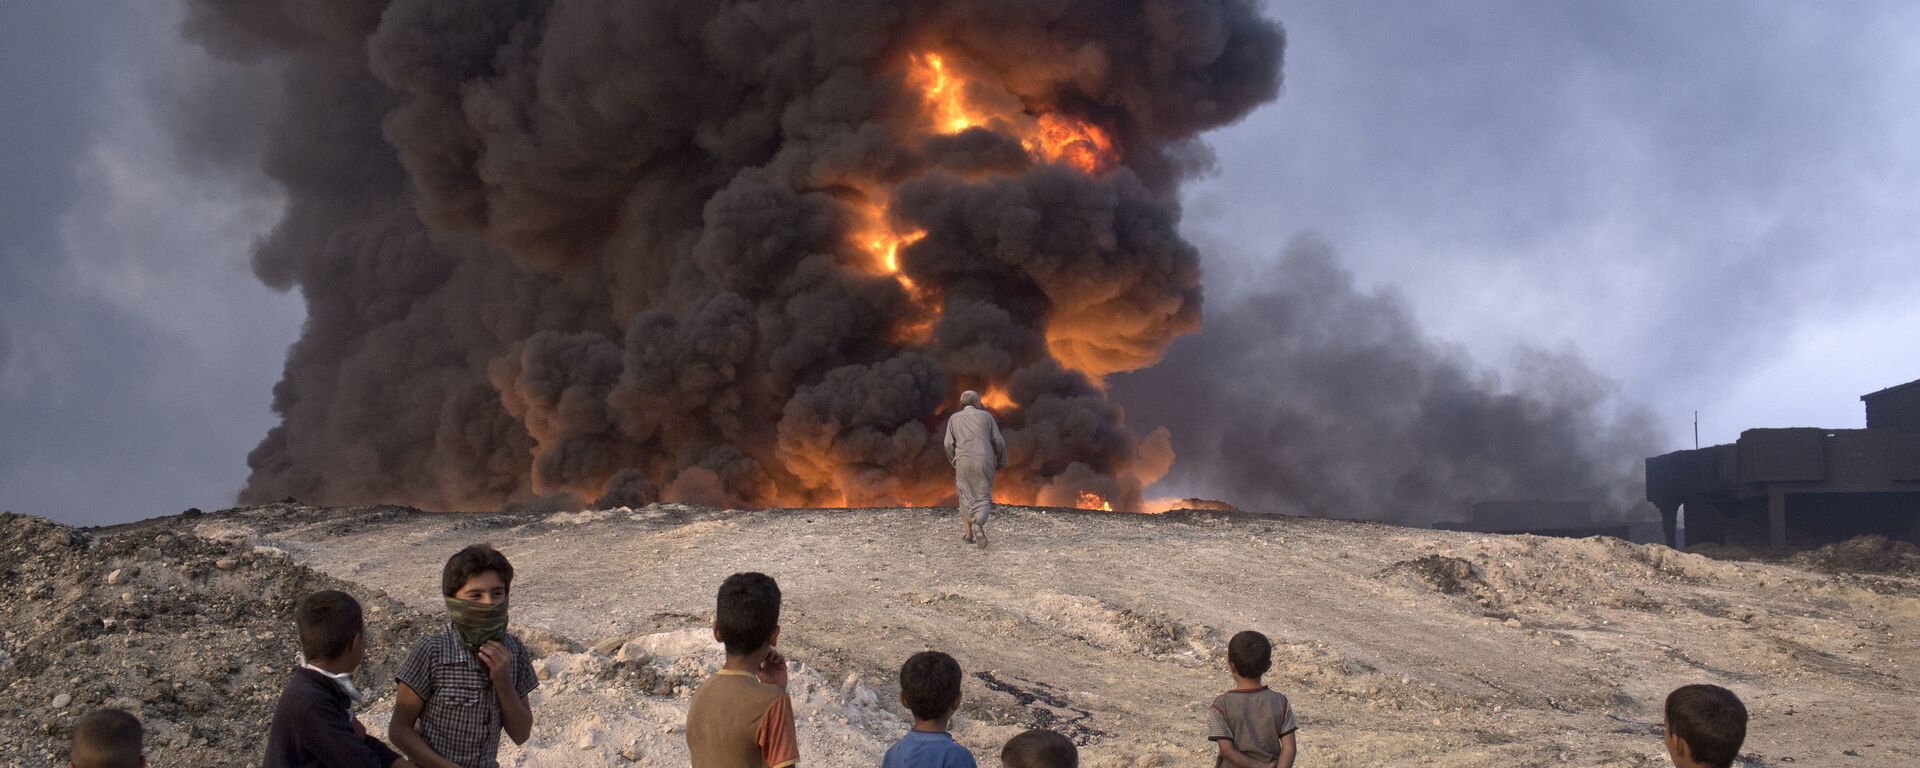 FILE -- In this Sunday, Oct. 23, 2016 file photo, people watch a burning oil well in Qayyarah, about 31 miles (50 km) south of Mosul, Iraq - Sputnik International, 1920, 24.10.2023